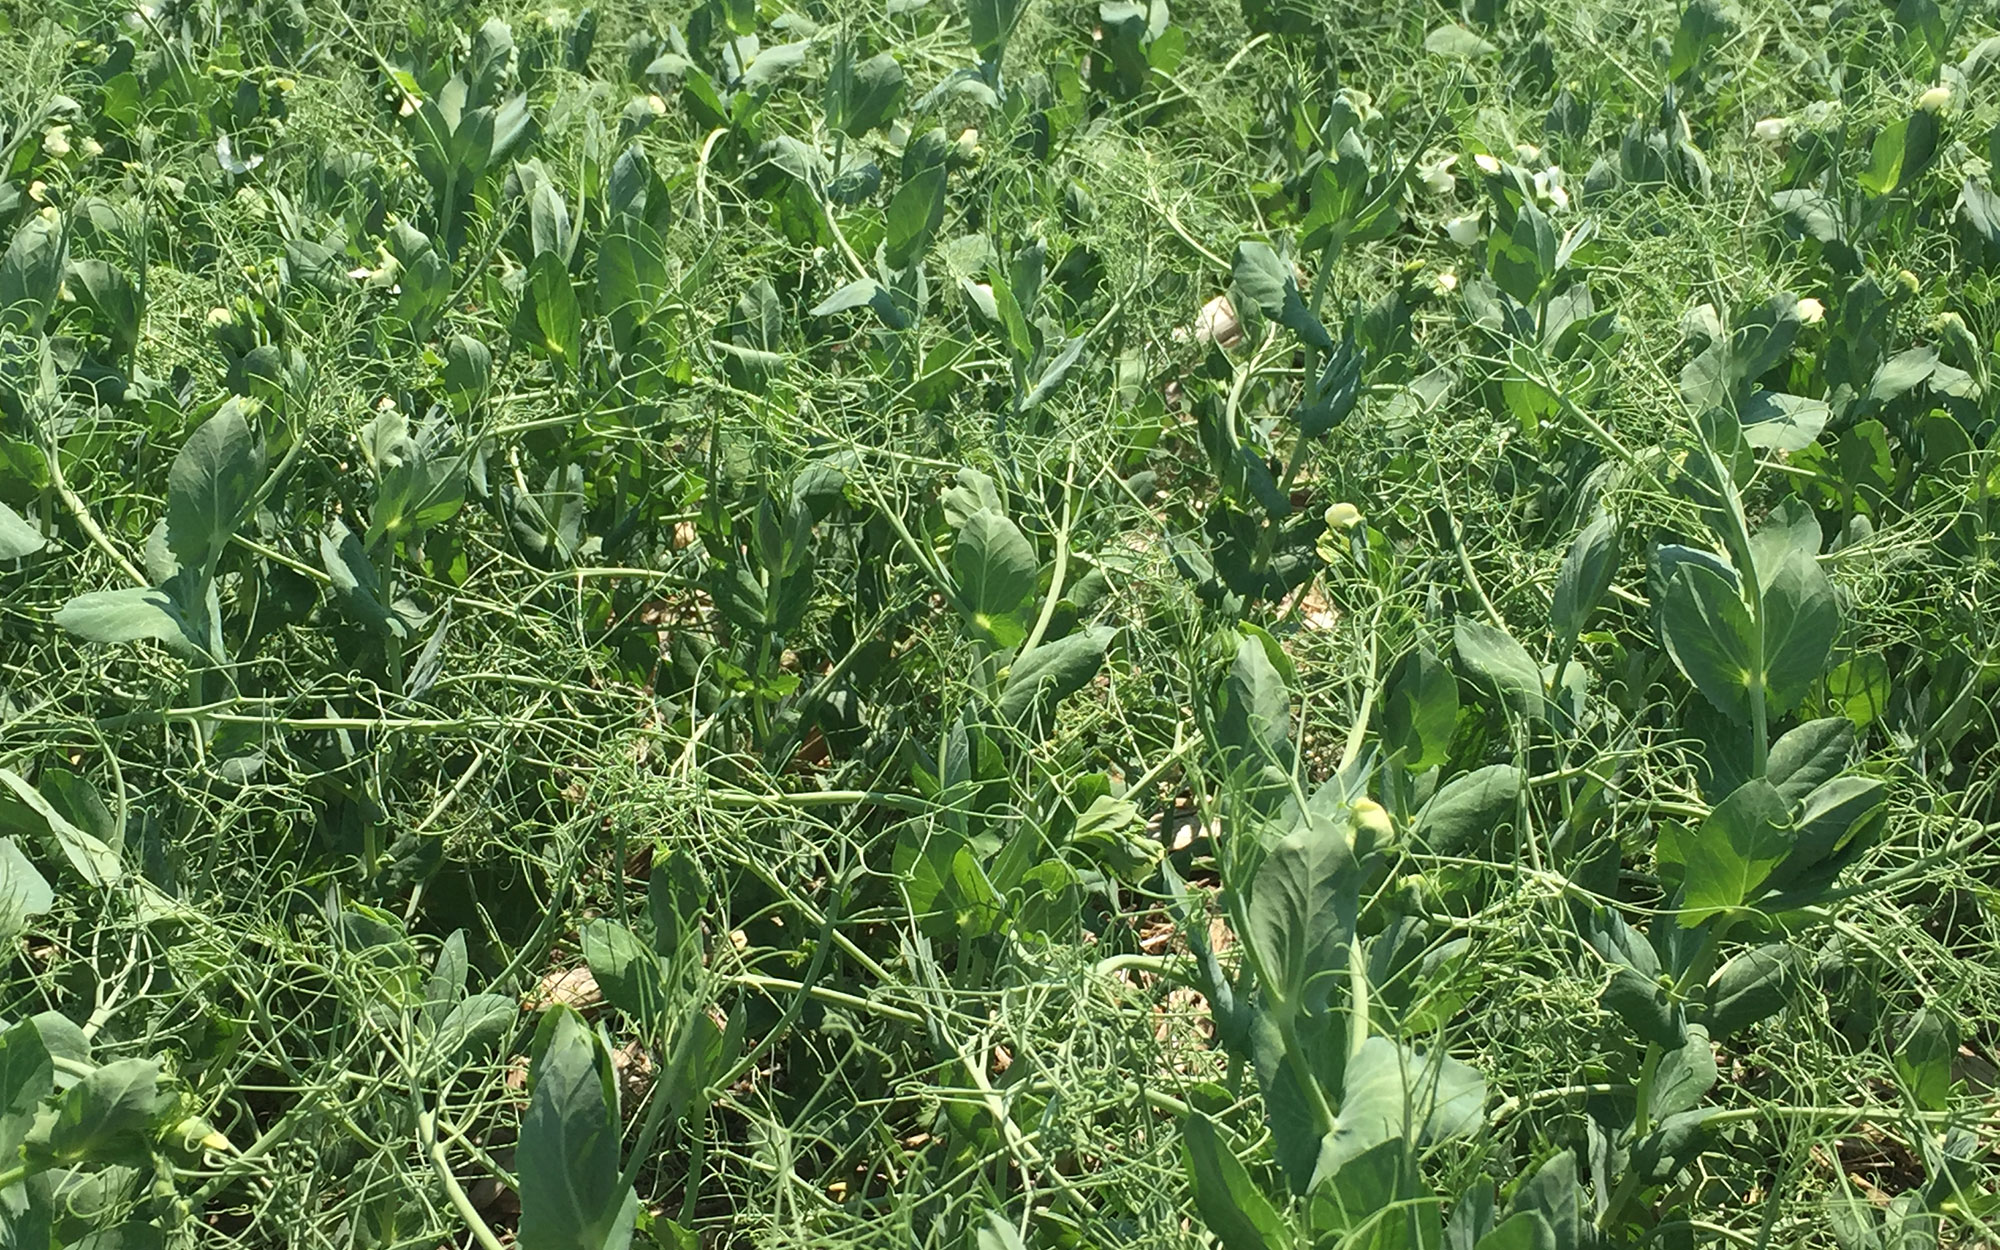 A stand of field peas being grown for grain.